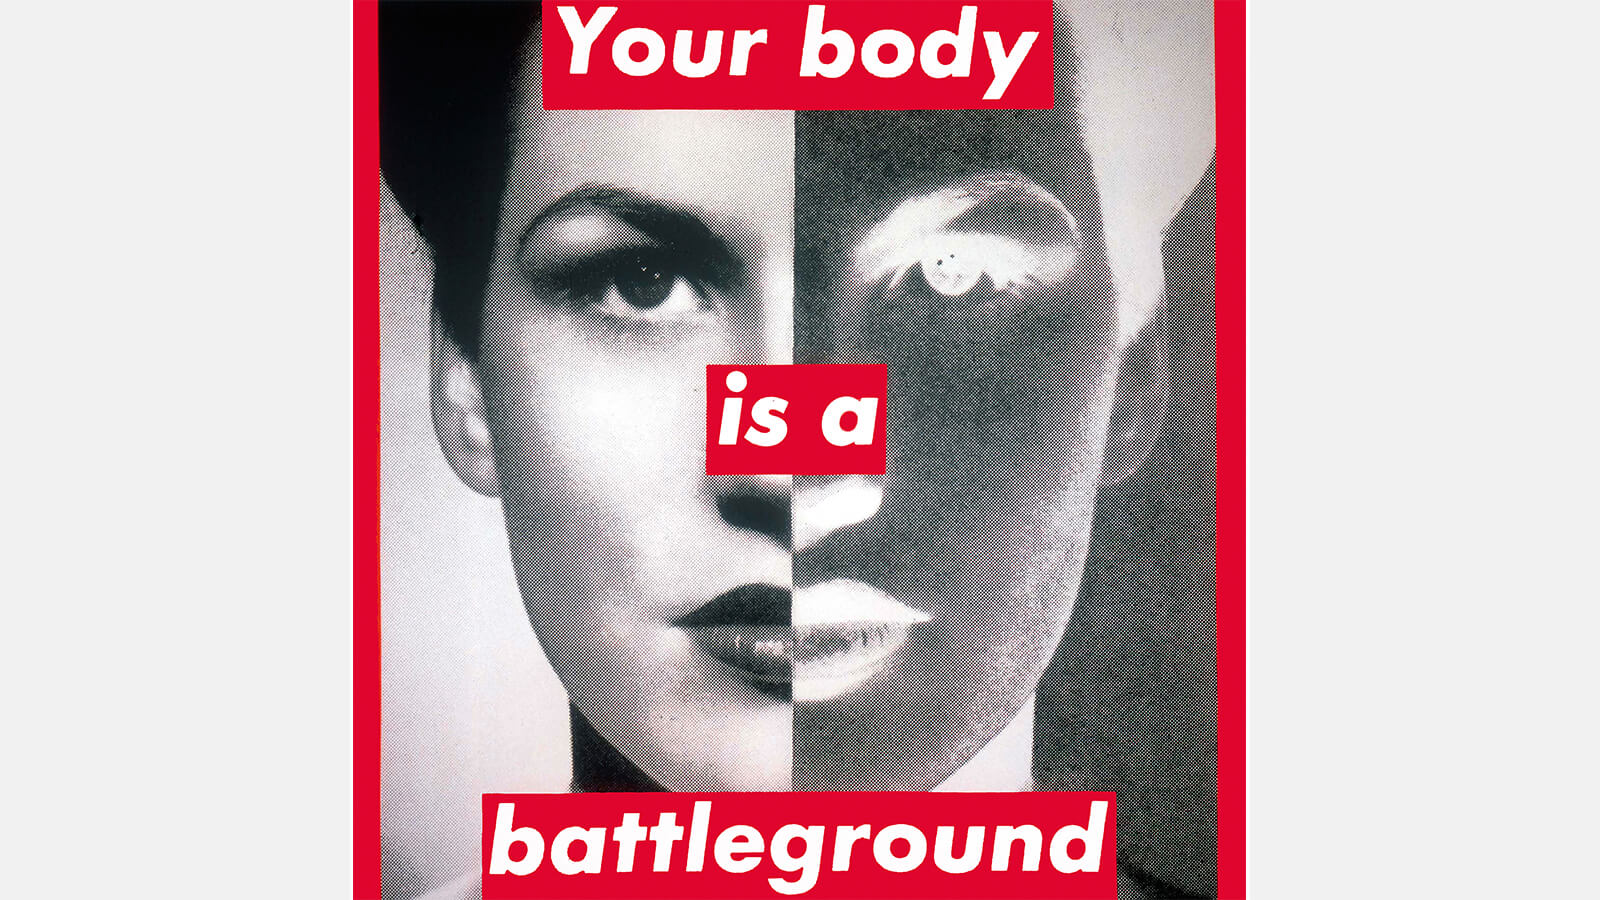 Image of artwork by American conceptual artist and collagist Barbara Kruger